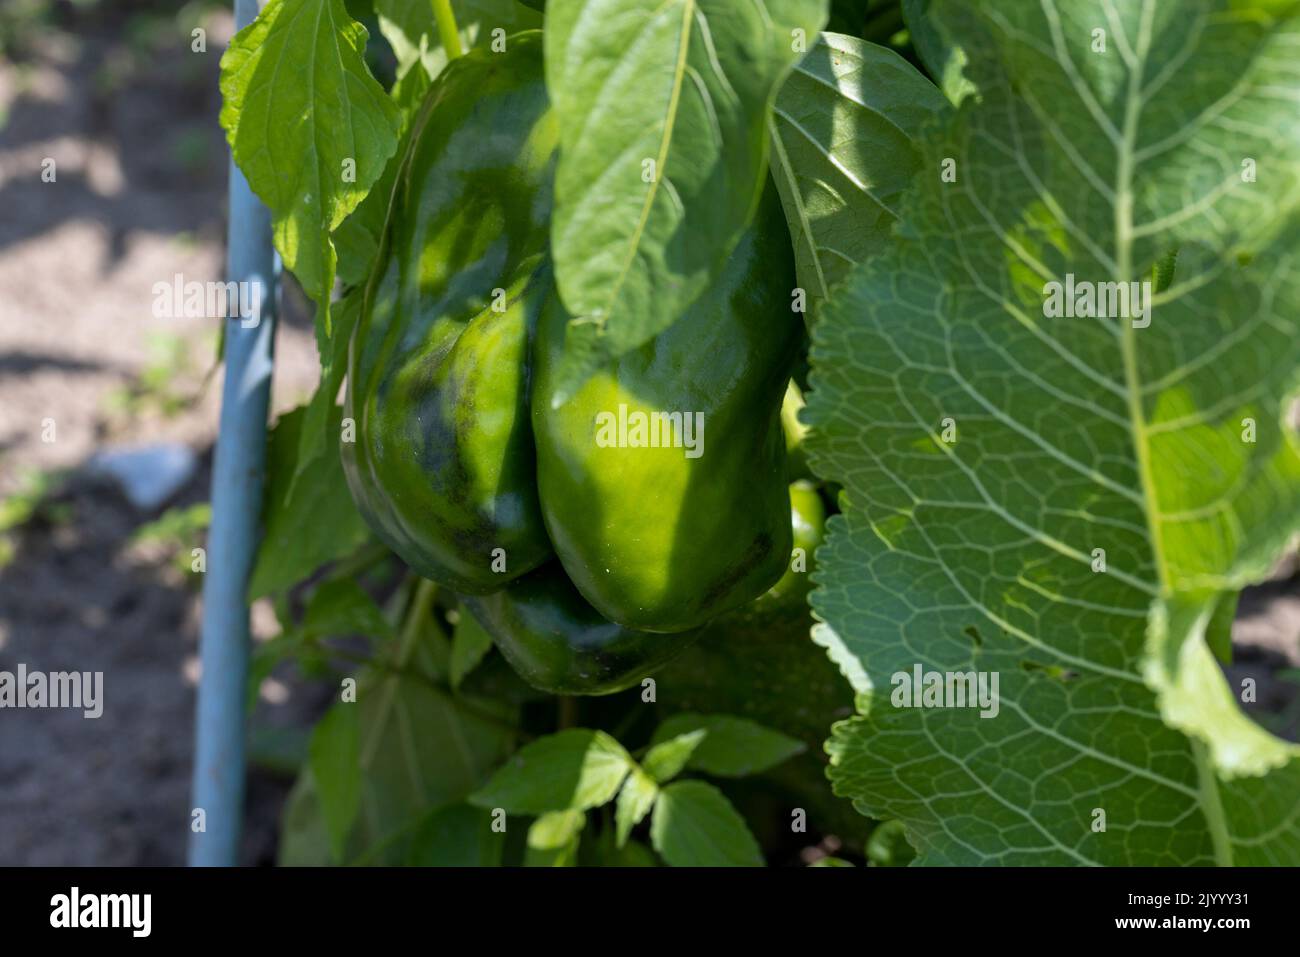 green peppers on a flying field, a field with growing green peppers Stock Photo